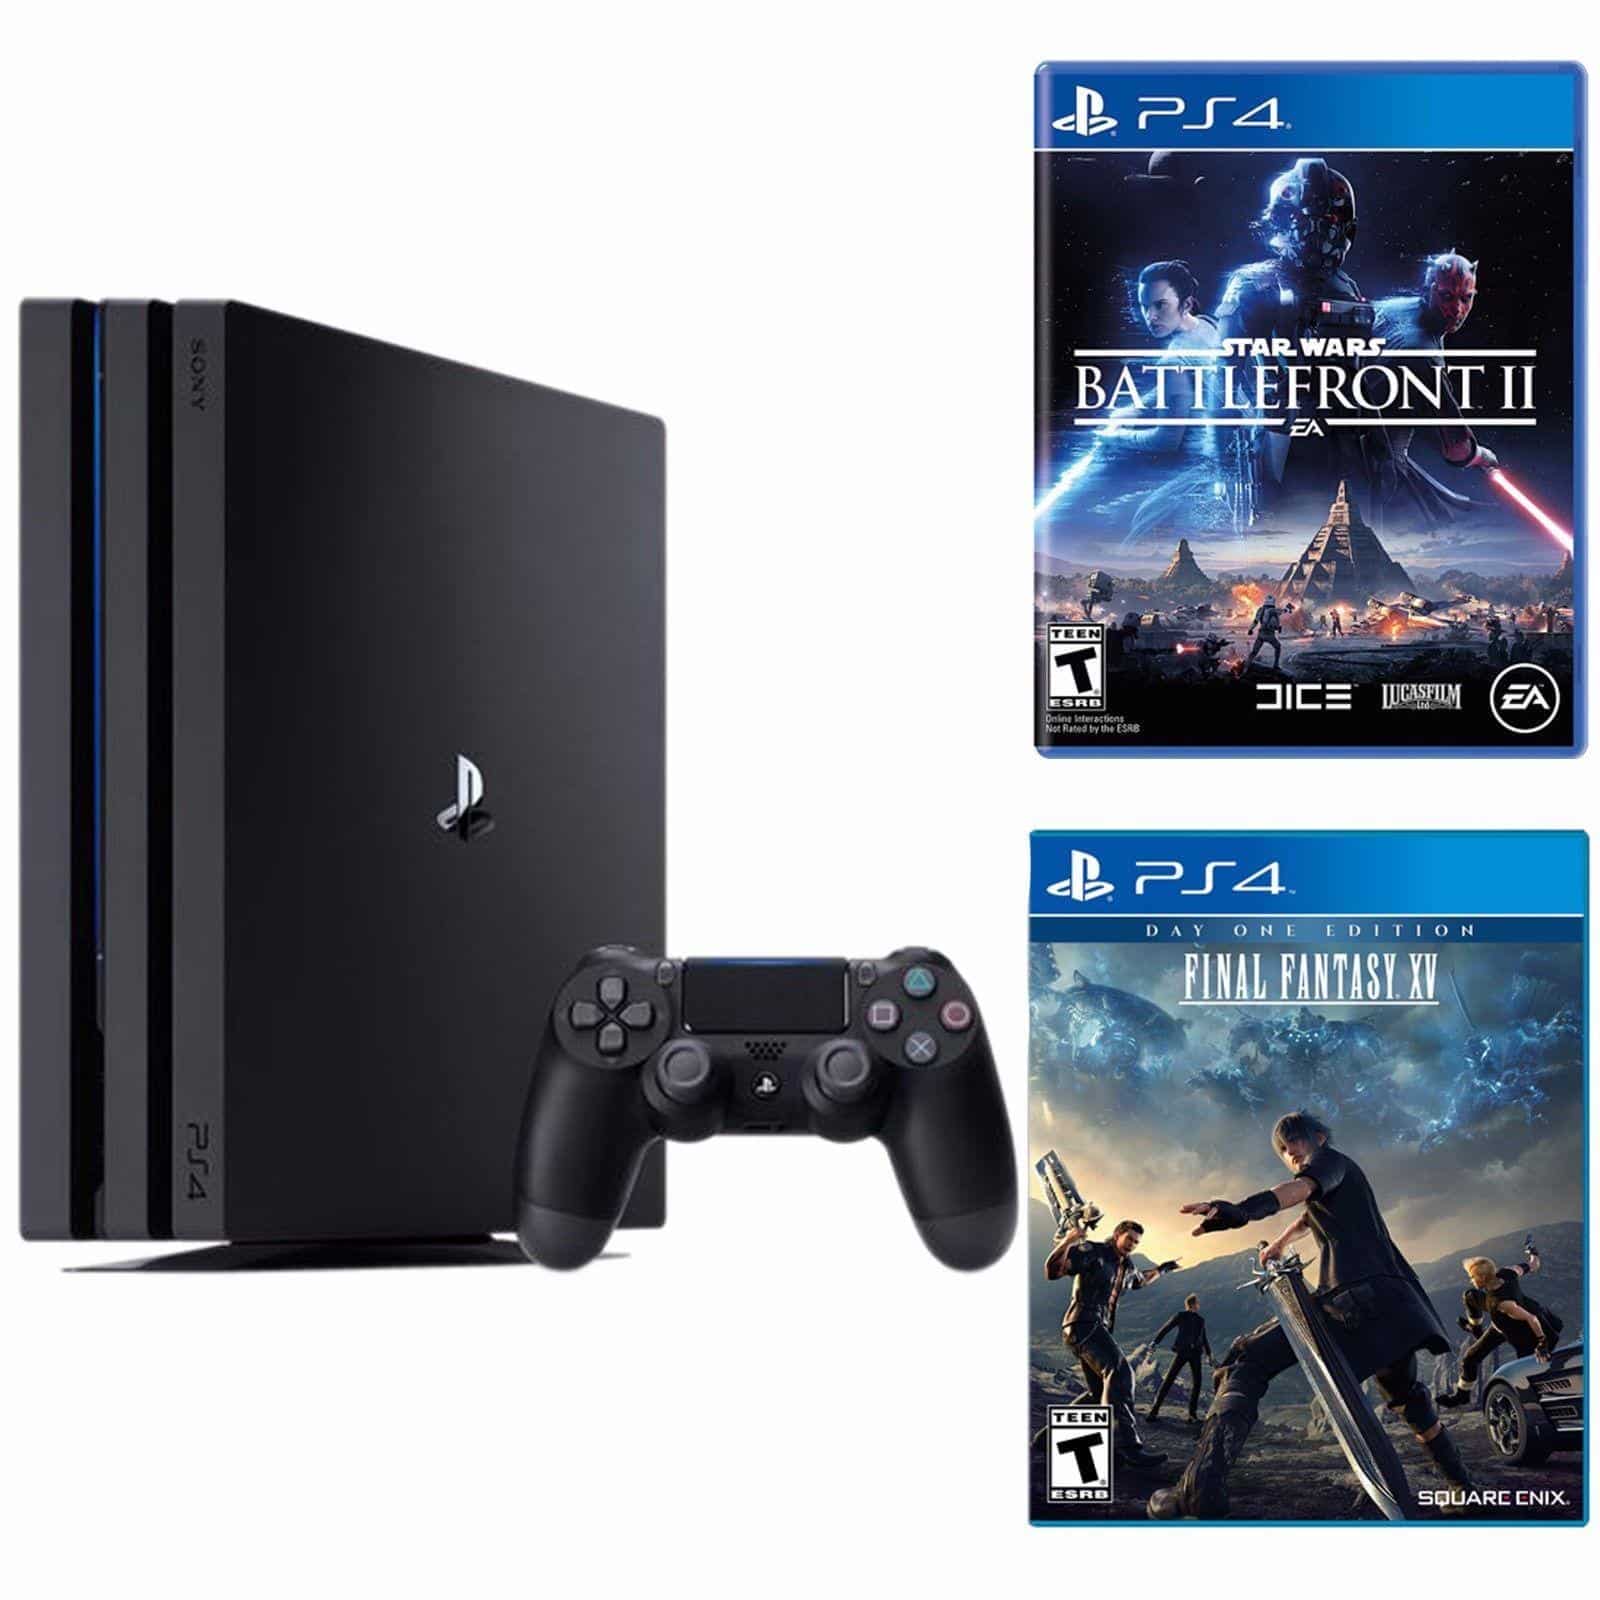 Playstation 4 Pro 1TB Console with FFXV and Star Wars Deals